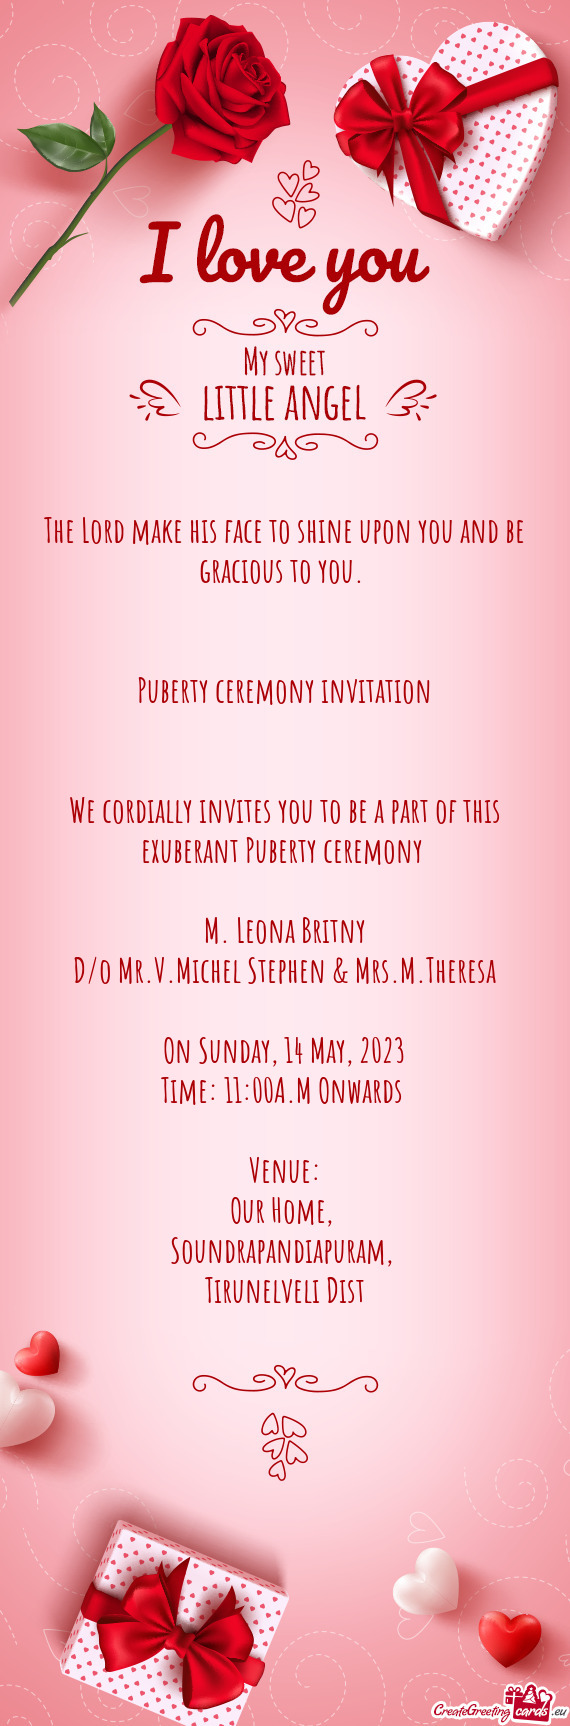 Puberty ceremony invitation  We cordially invites you to be a part of this exuberant Pube